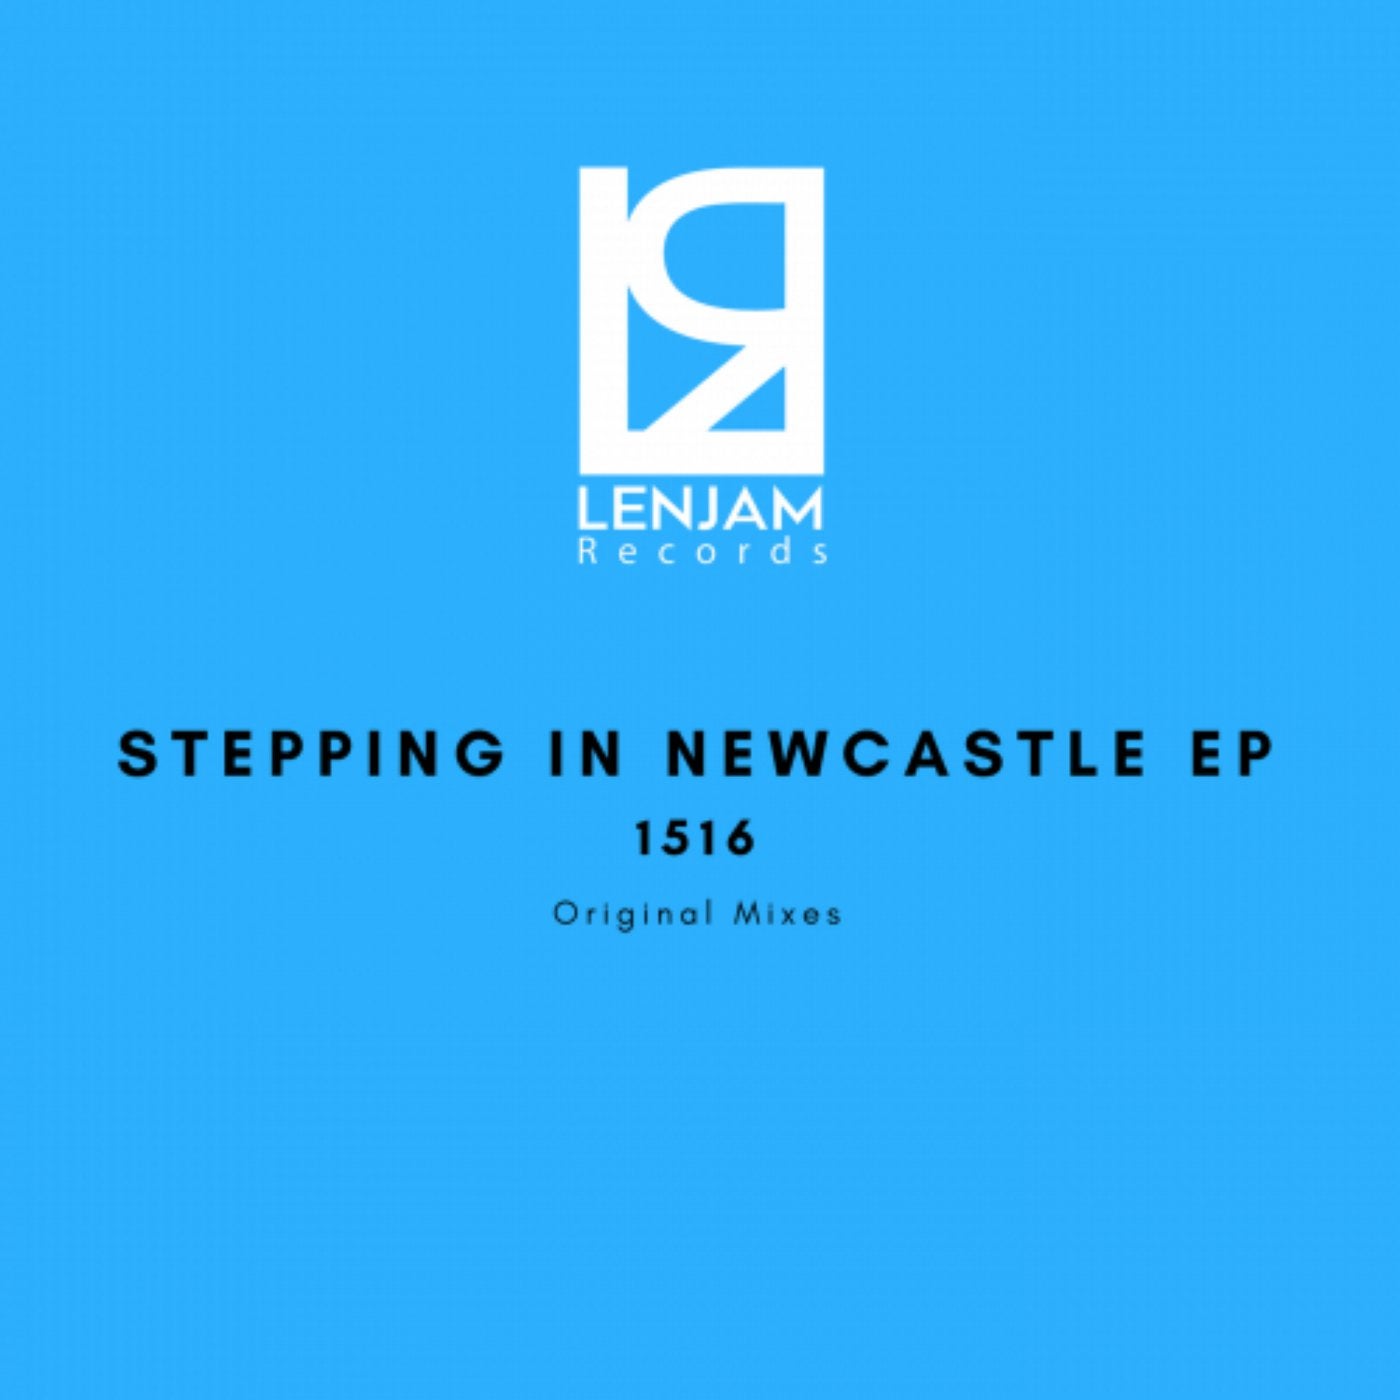 Stepping in Newcastle EP